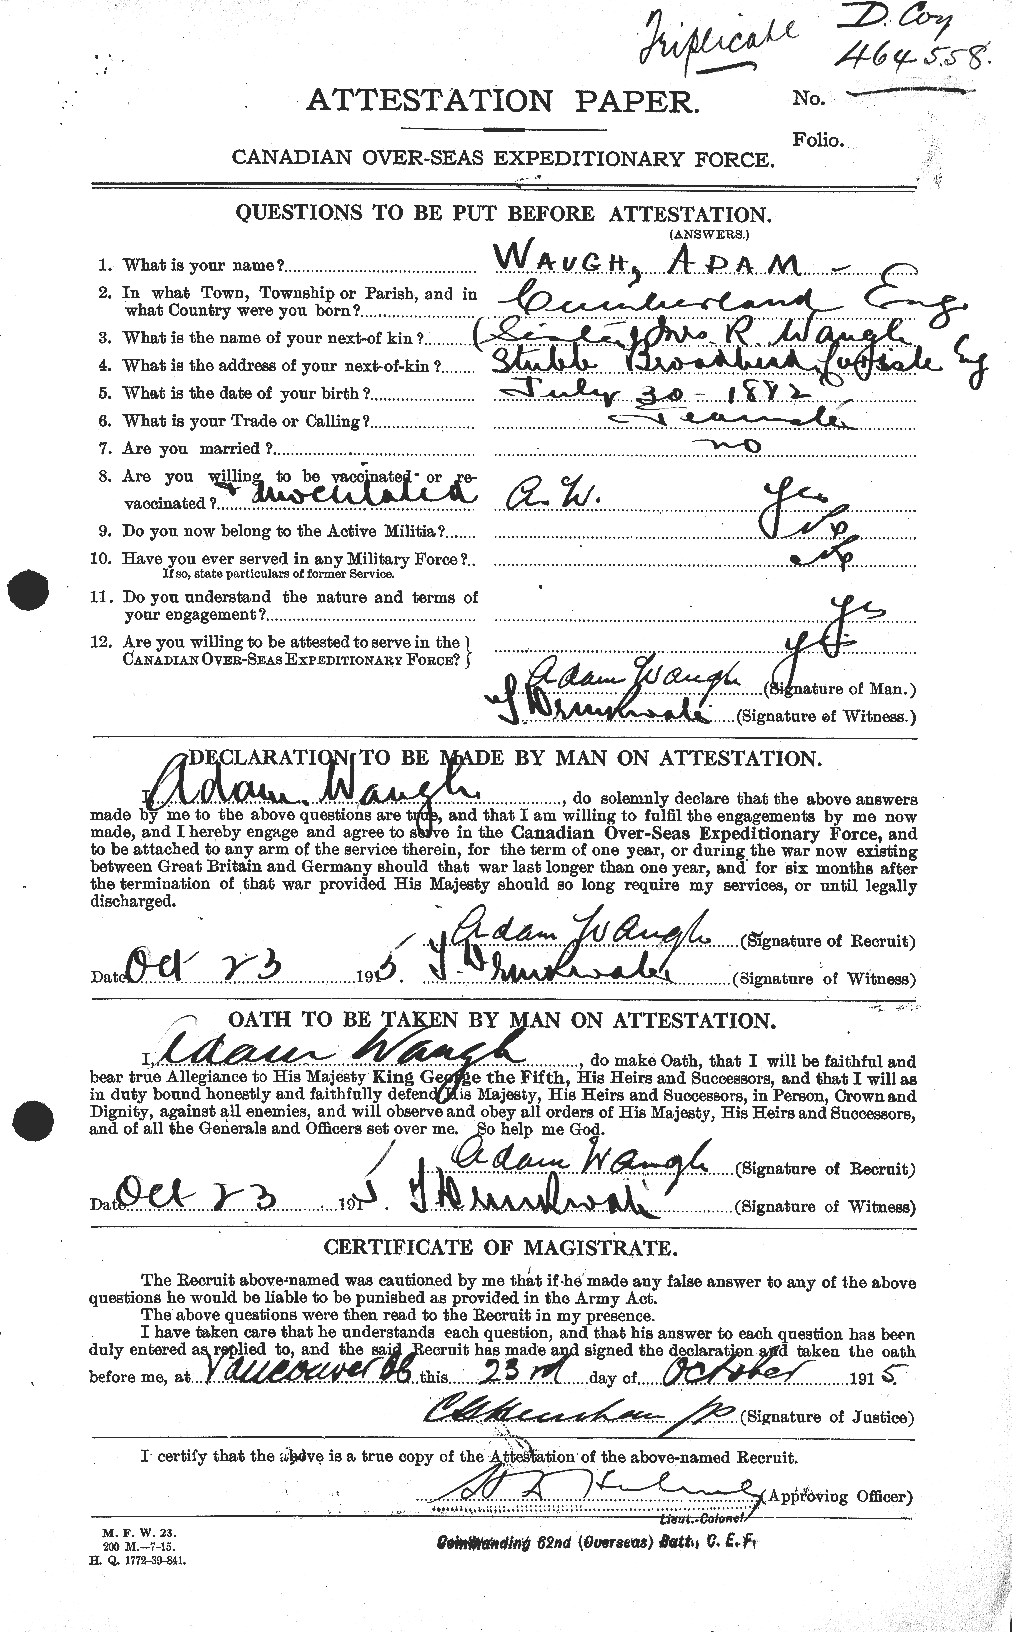 Personnel Records of the First World War - CEF 662972a